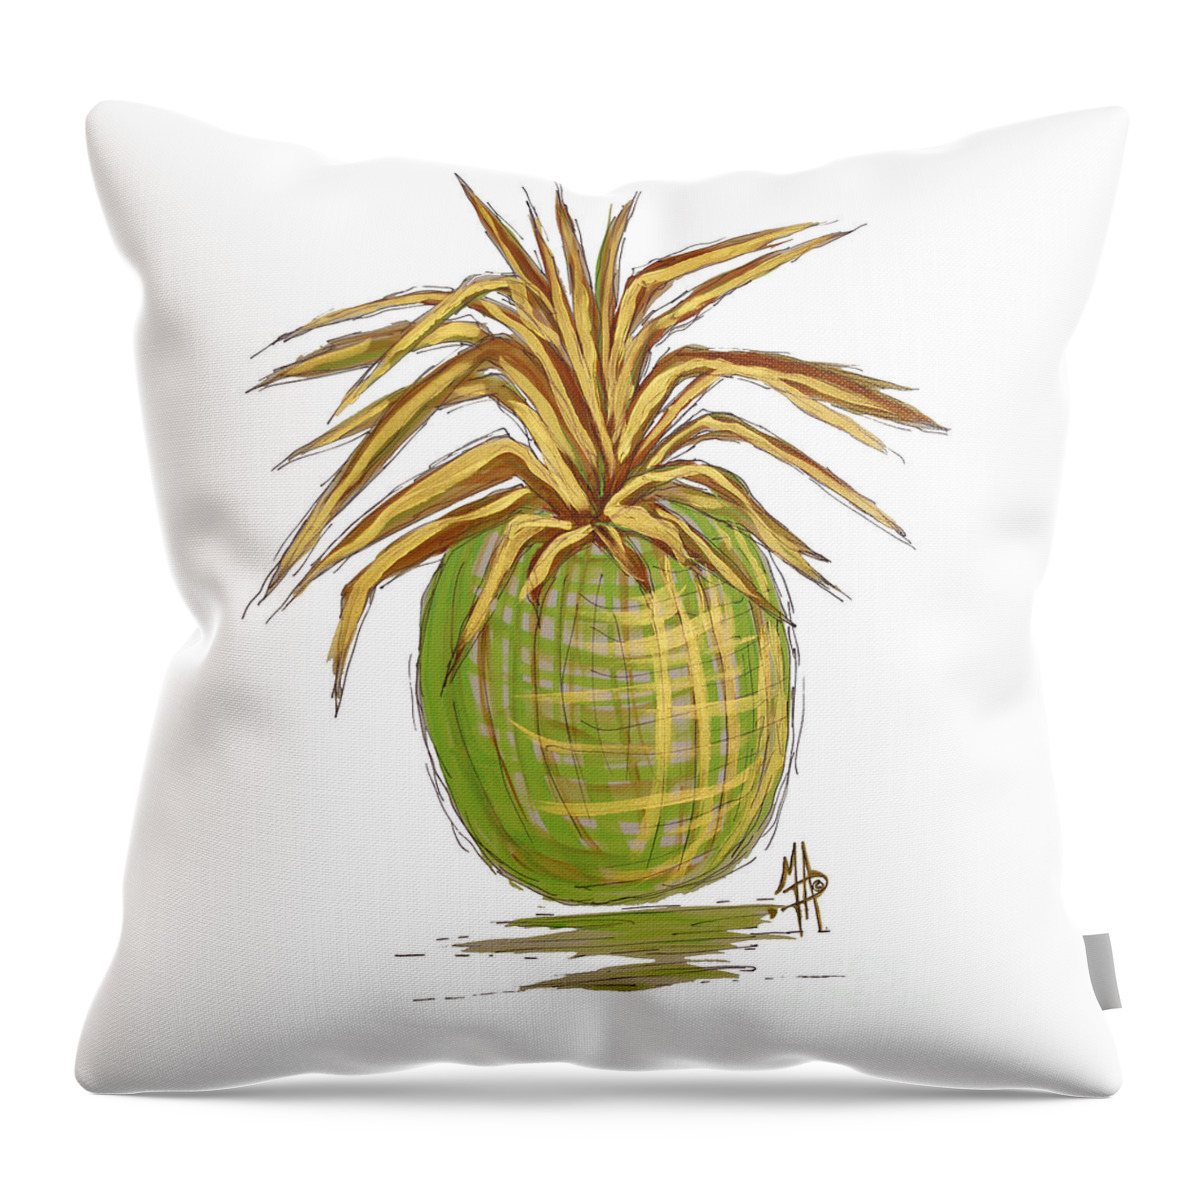 Pineapple Throw Pillow featuring the painting Green Gold Pineapple Painting Illustration Aroon Melane 2015 Collection by MADART by Megan Aroon